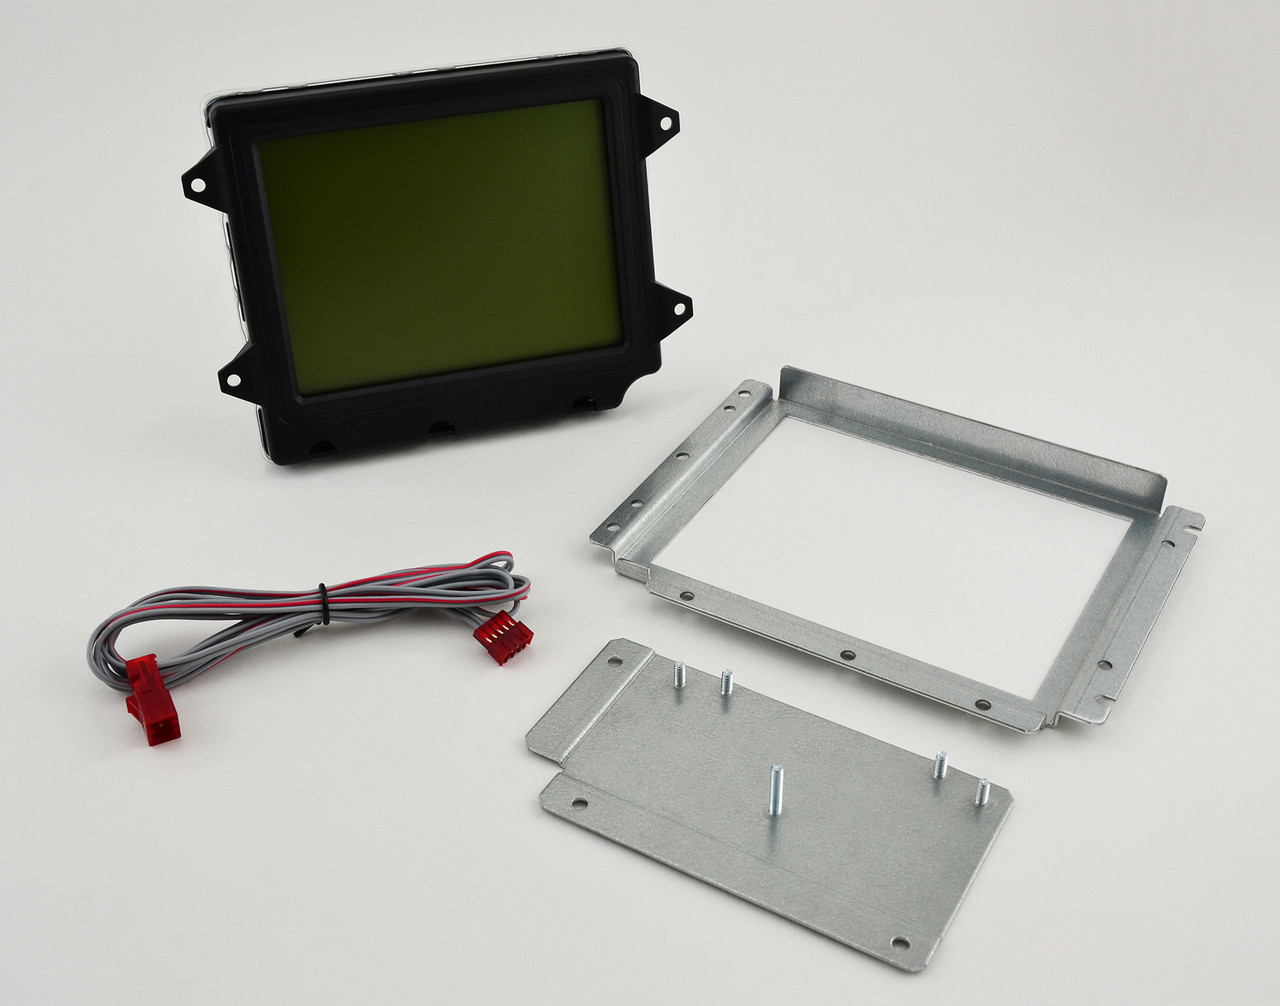 Monochrome QVGA Display And Adapter Kit For Gilbarco® Dispensers. For Encore™, 500, 300 & Advantage™ Dispensers